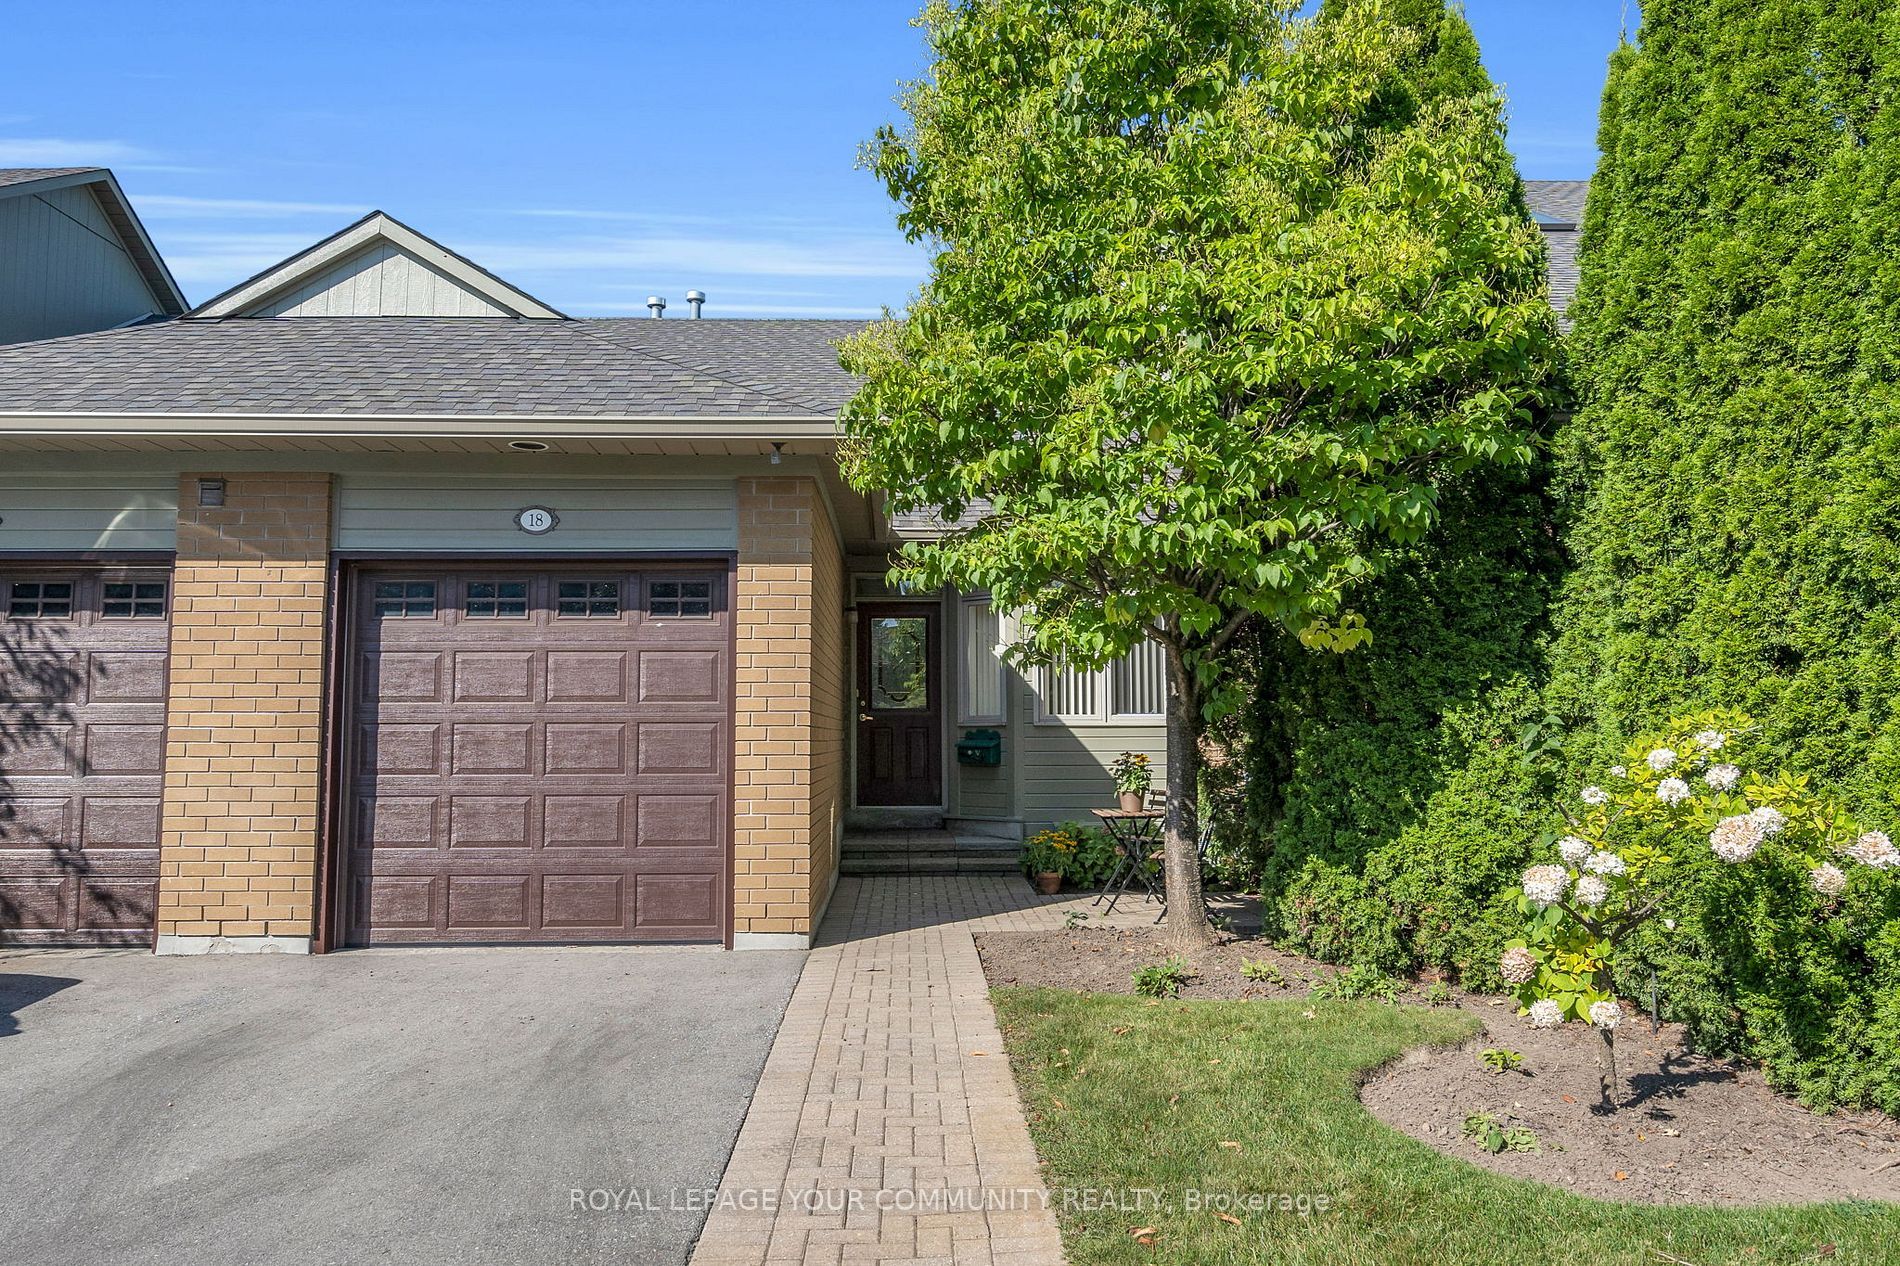 New property listed in Greensborough, Markham